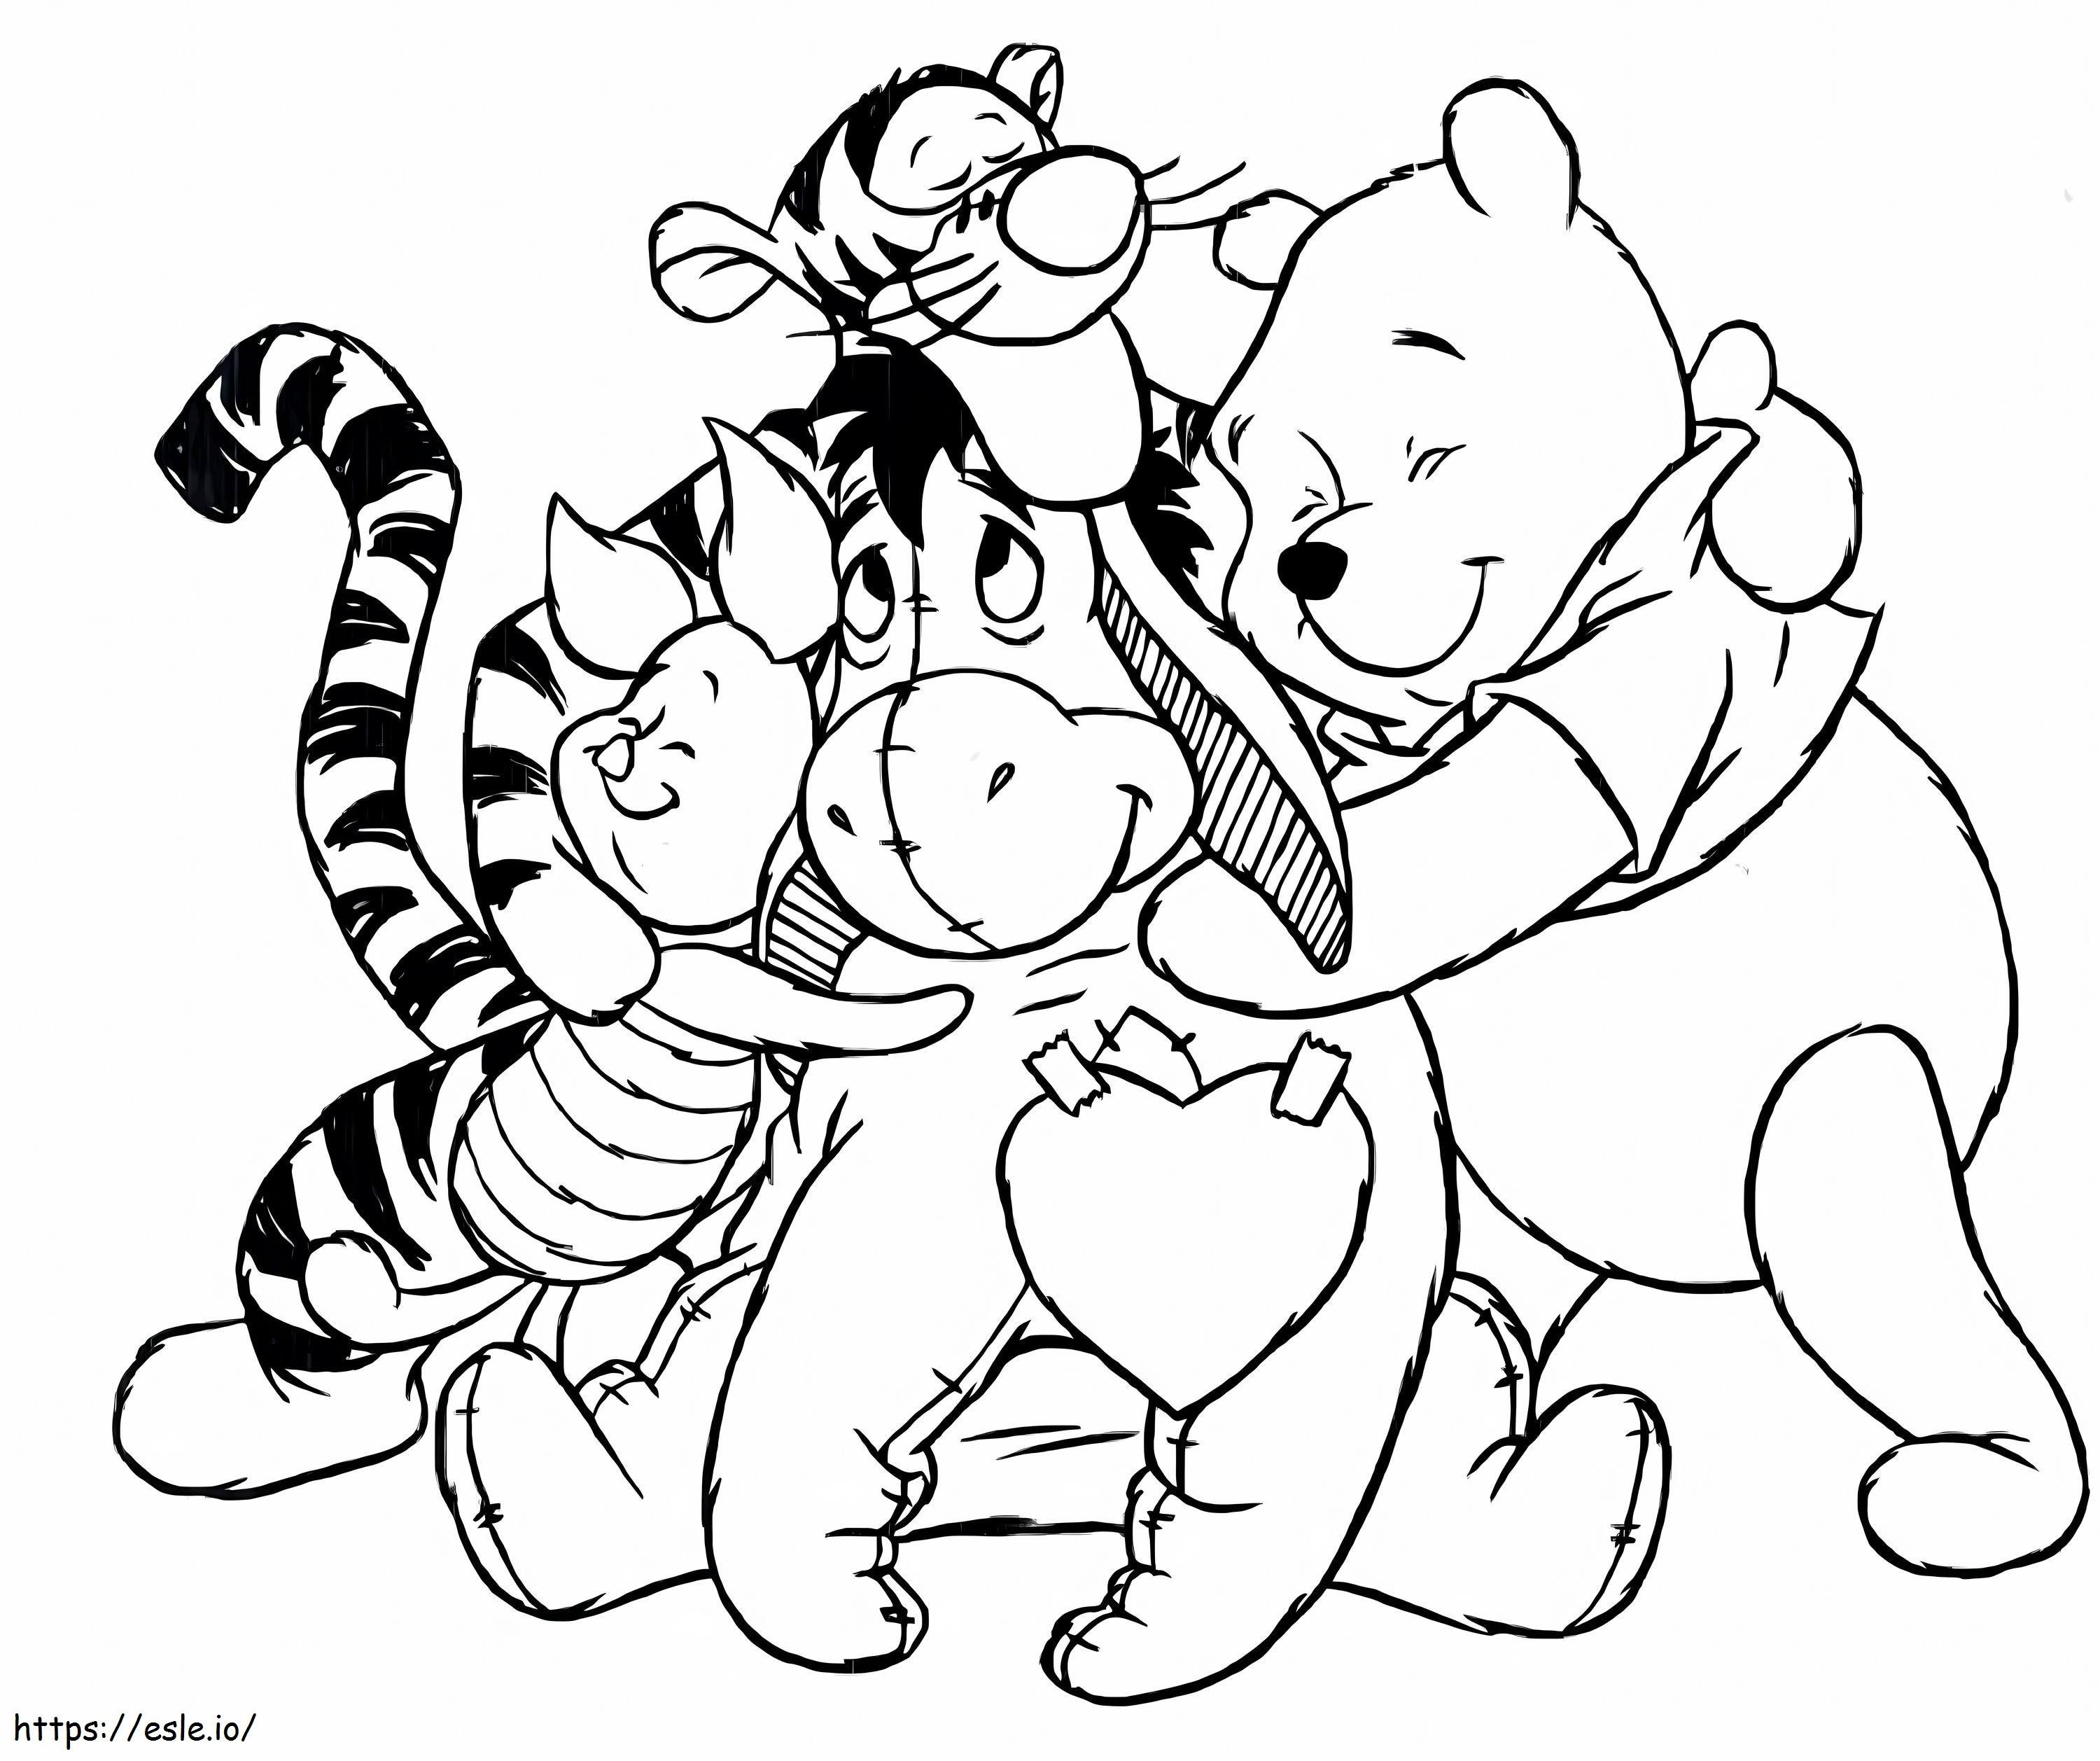 Disney Pooh Bear With Friends coloring page